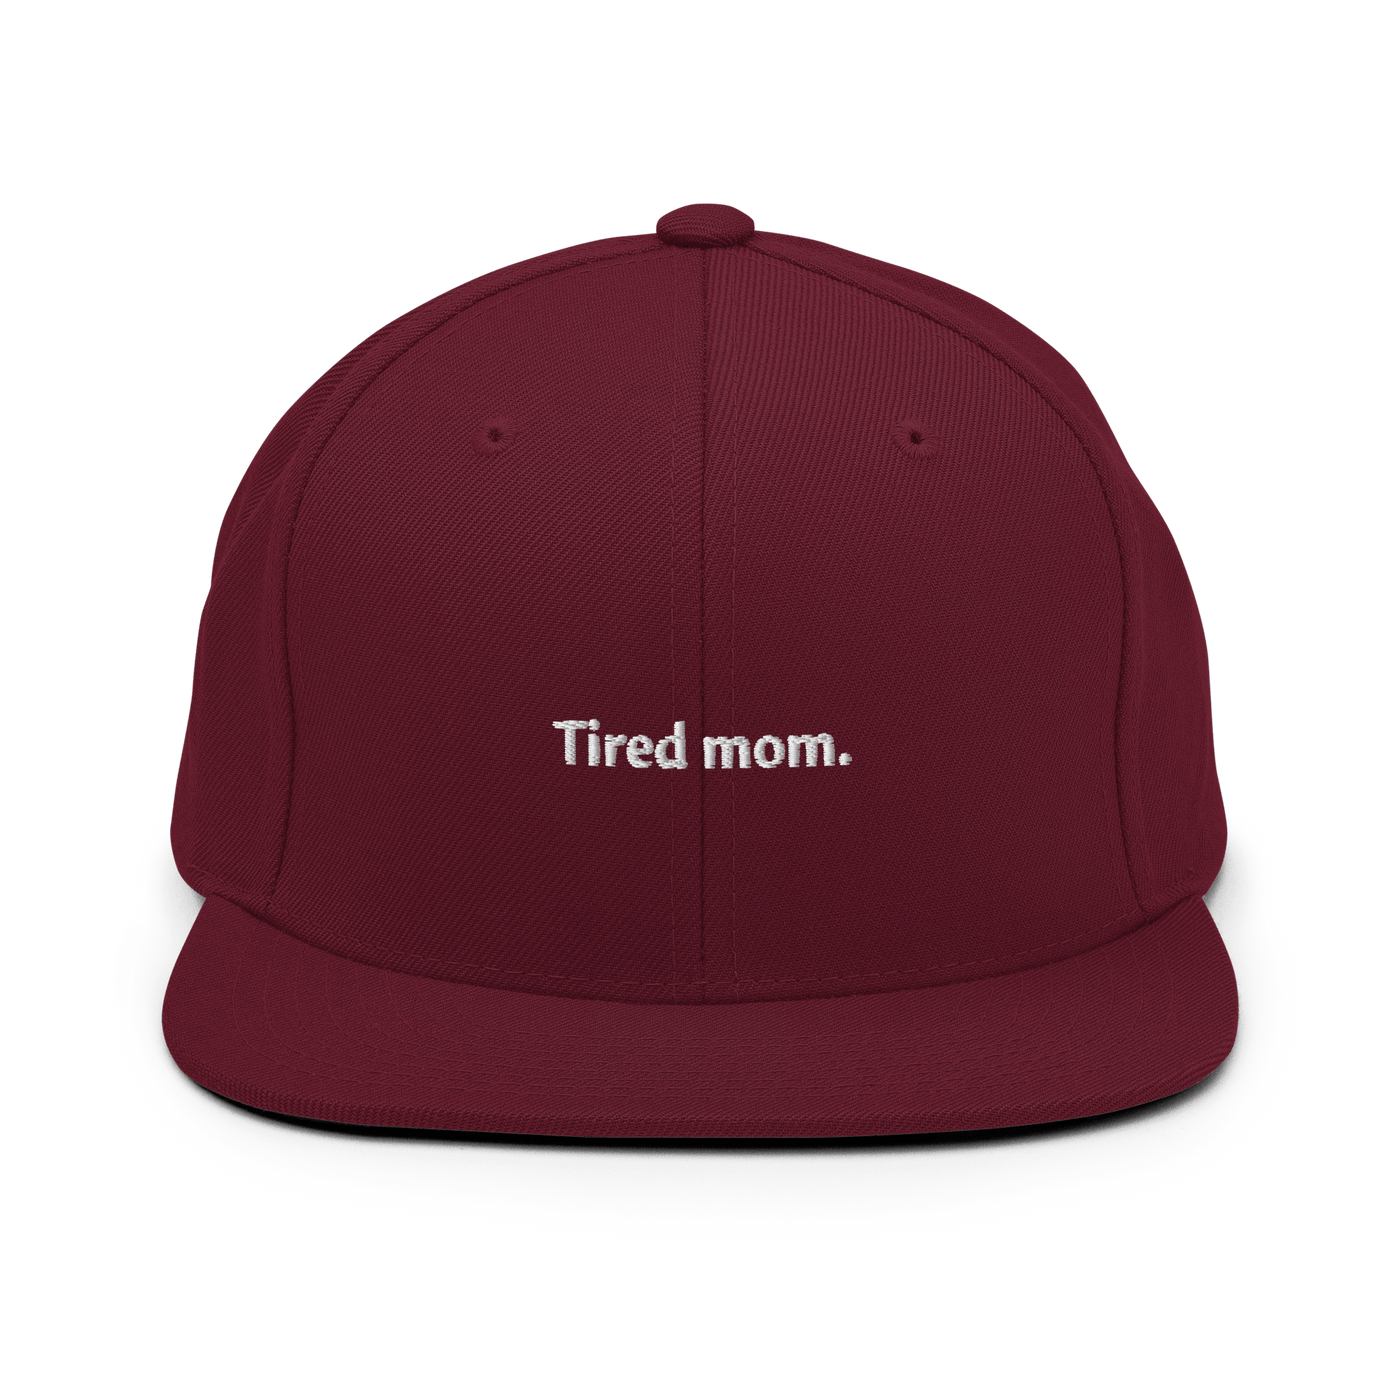 Tired Mom Snapback - Maroon - - Just Another Cap Store